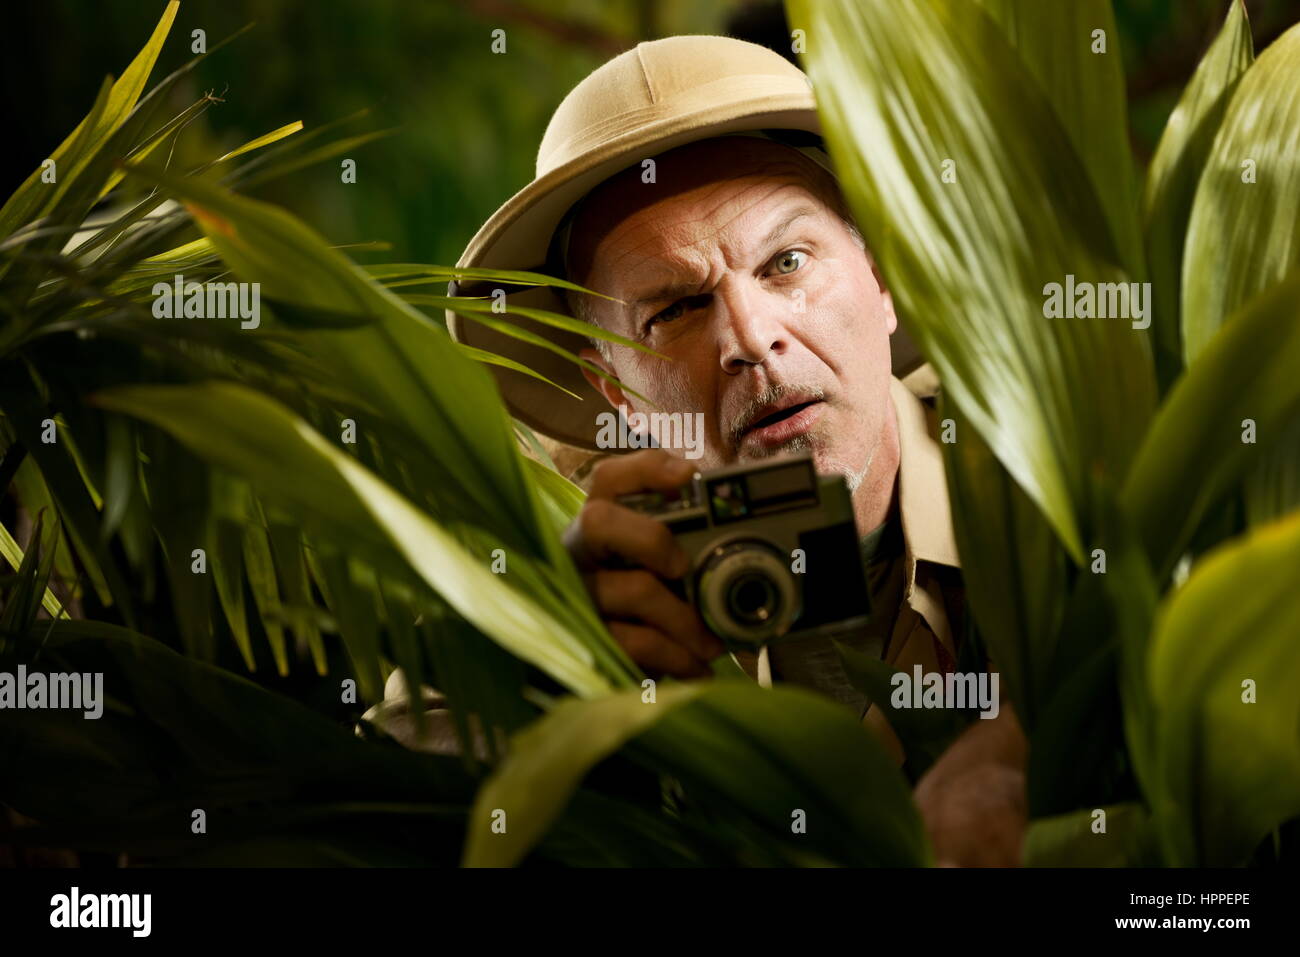 Explorer hiding in vegetation and taking pictures with vintage camera. Stock Photo